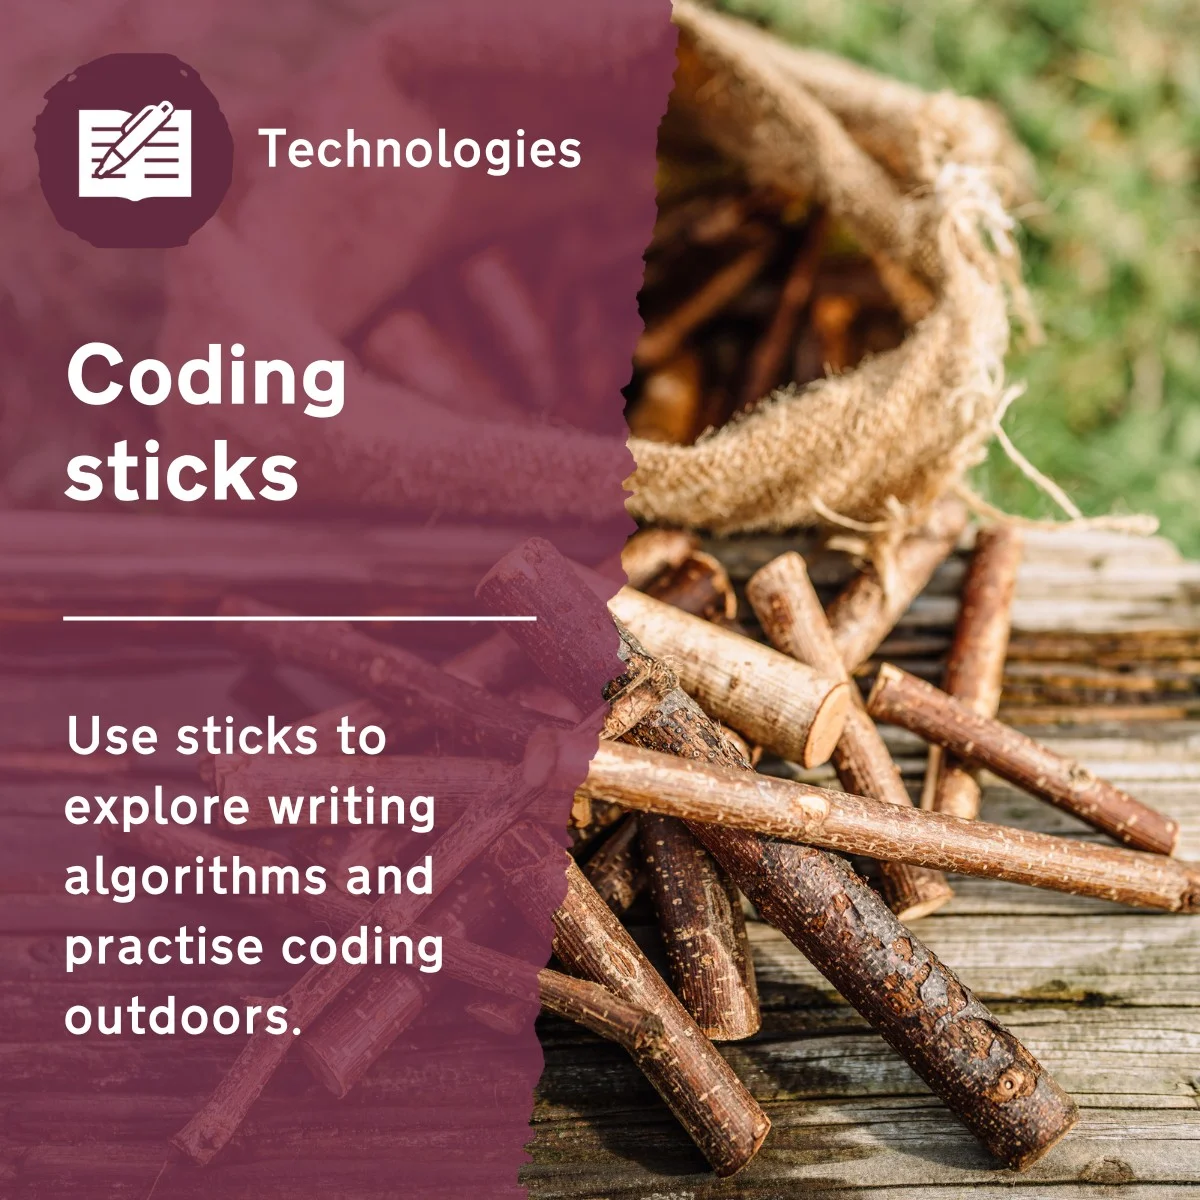 Use this primary computing activity to practise coding using sticks. This outdoor lesson idea allows children to explore writing algorithms, sequencing, and debugging in a fun way.